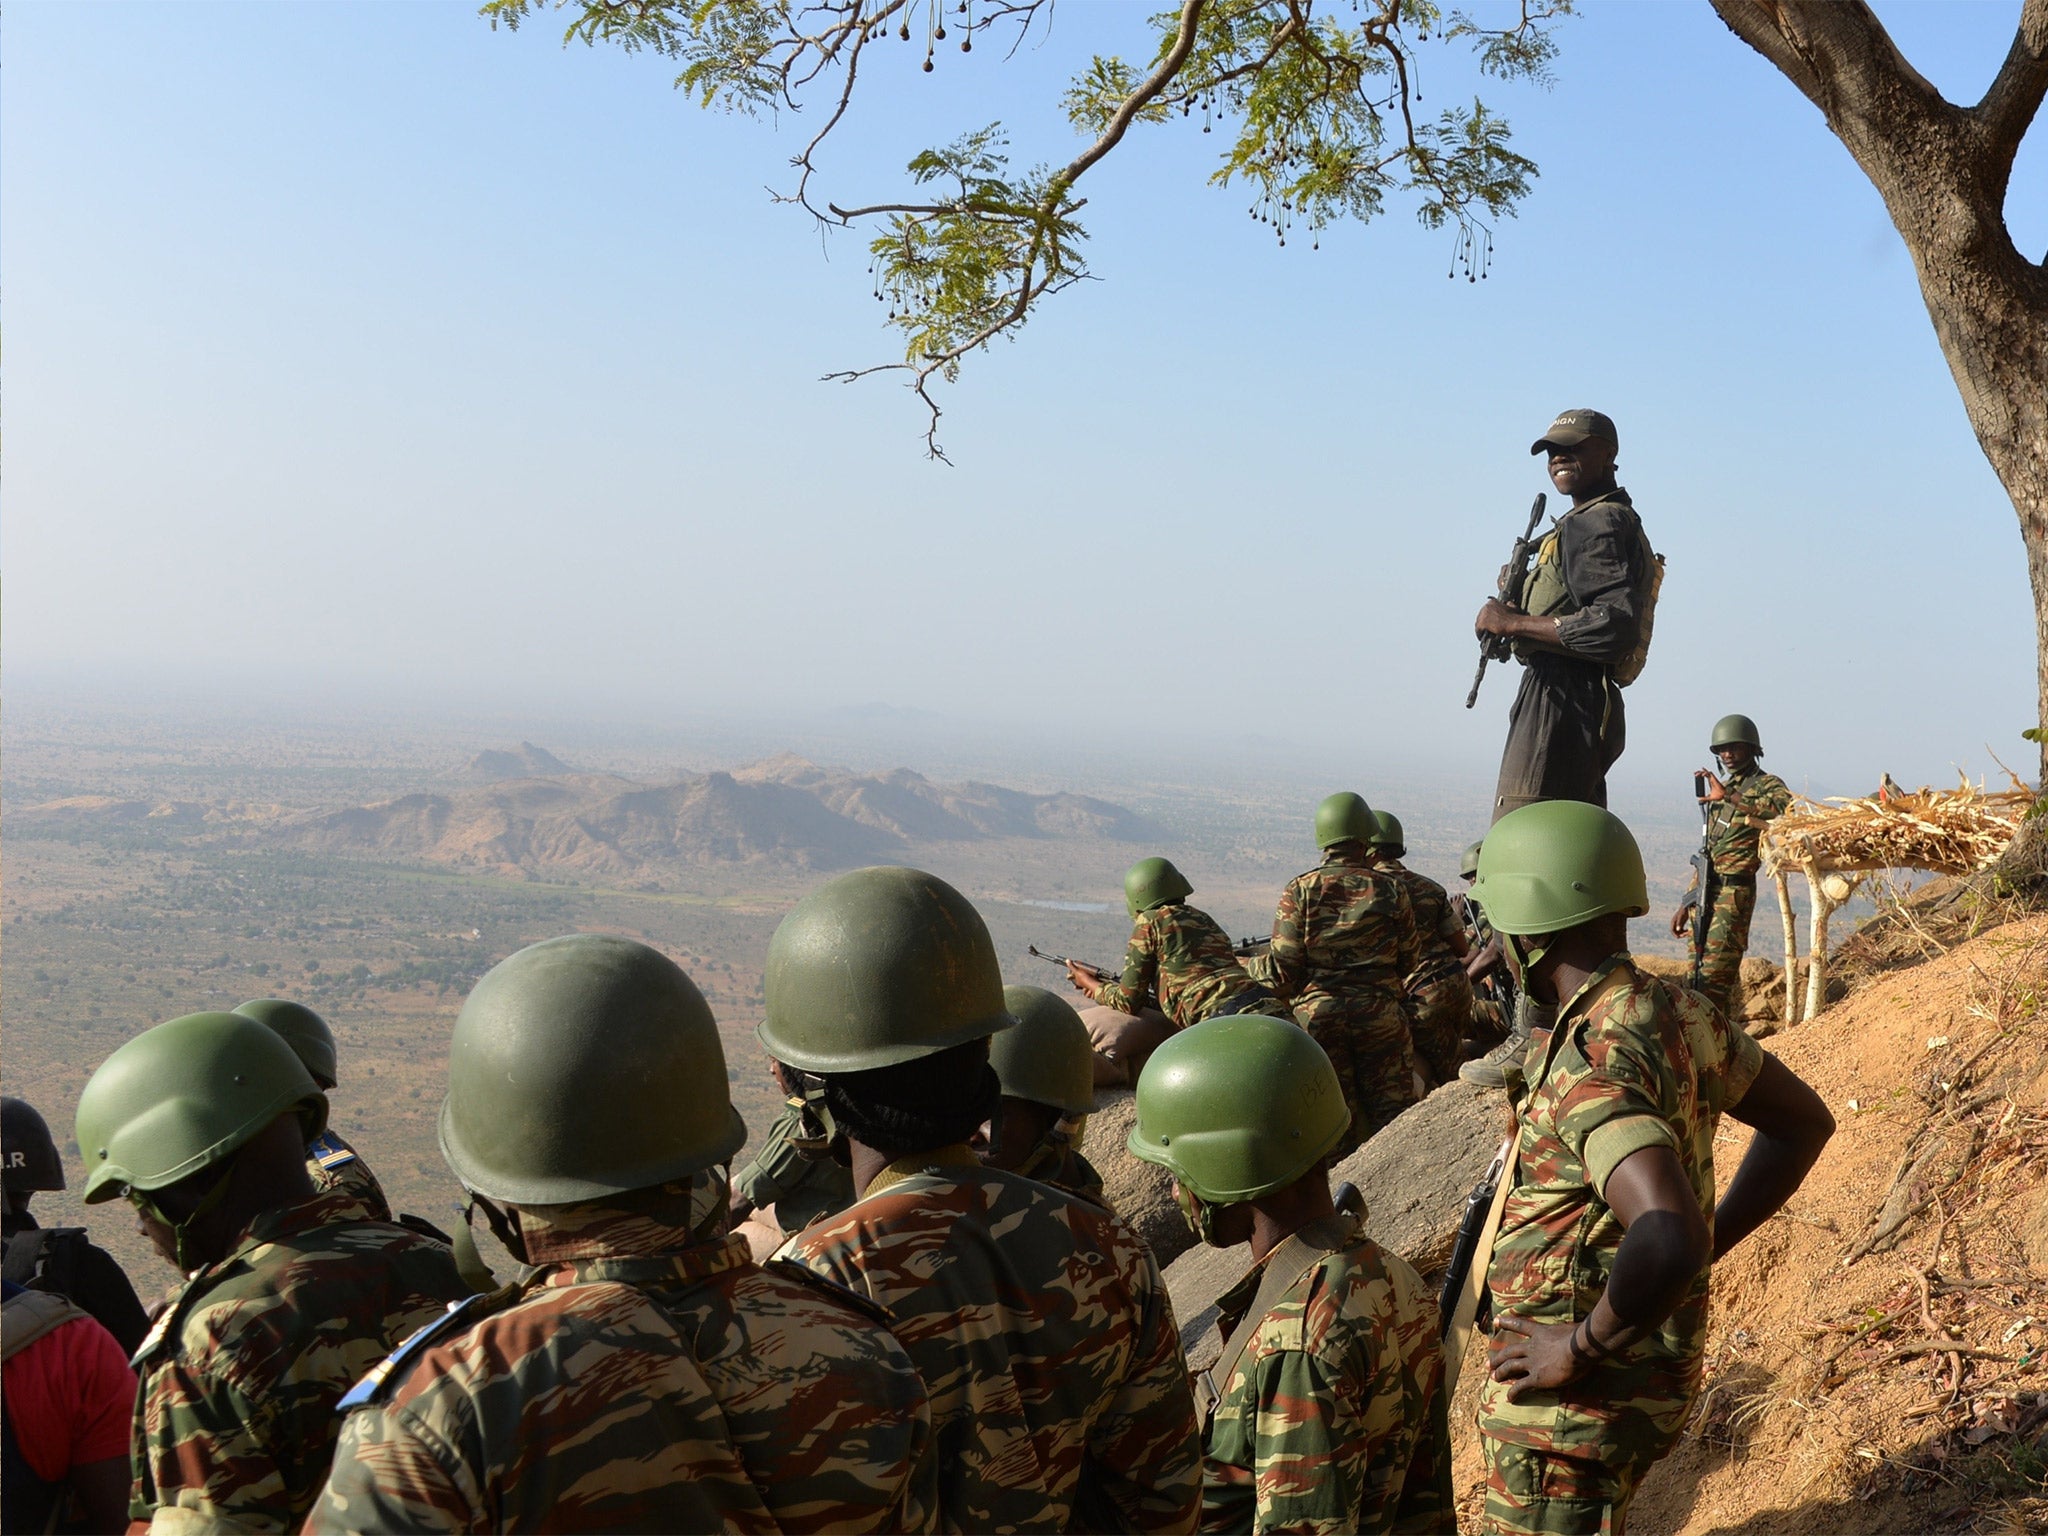 Cameroon's army forces on patrol near Mabass